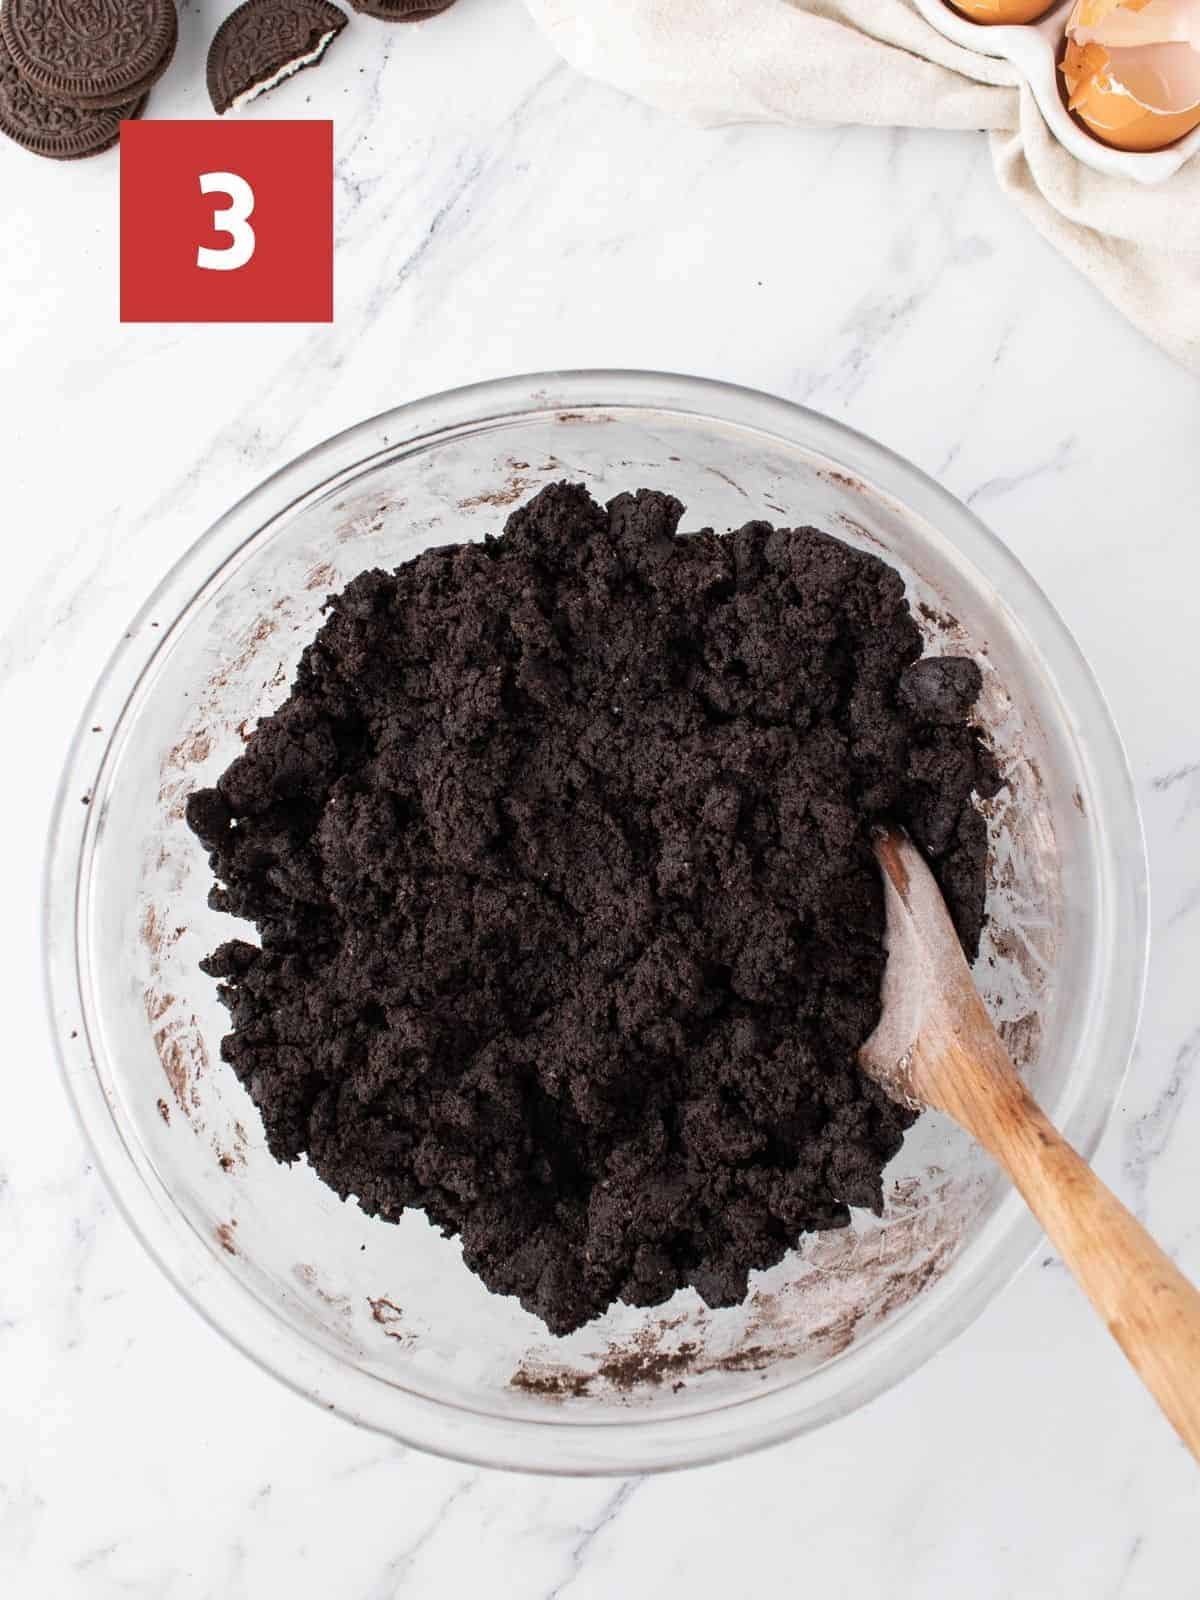 A glass mixing bowl with a dark brown/black cookie dough with a wooden spoon in the mix. The bowl sits on a white marble background with a red square in the upper left corner with a white '3'.